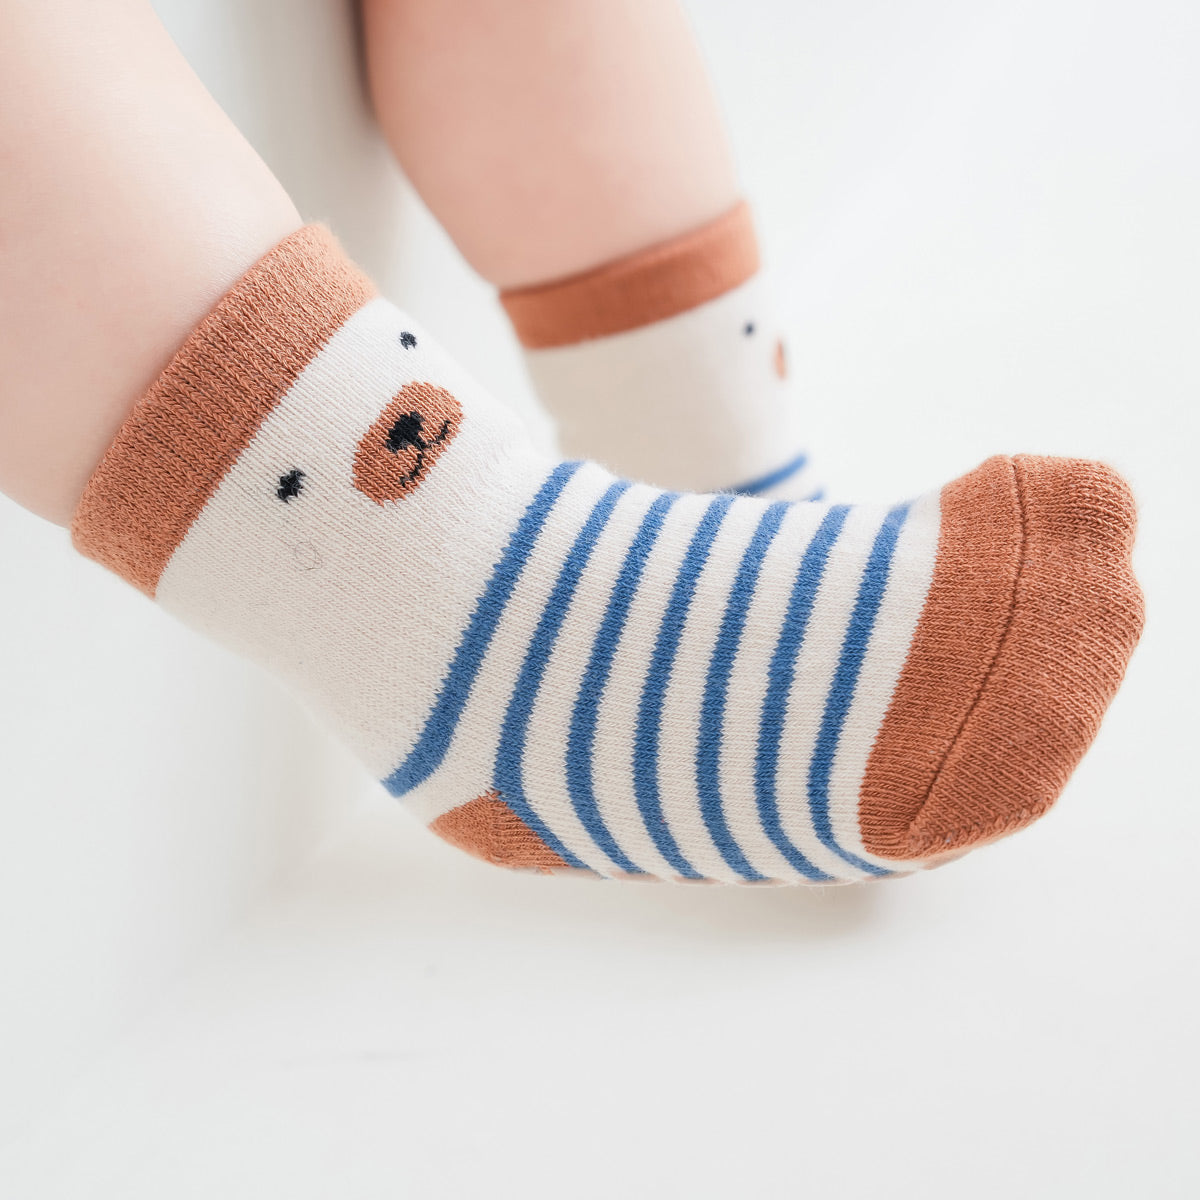 Arctic Circle - 4 Pairs of Stay-On Baby & Toddler Non-Slip Socks